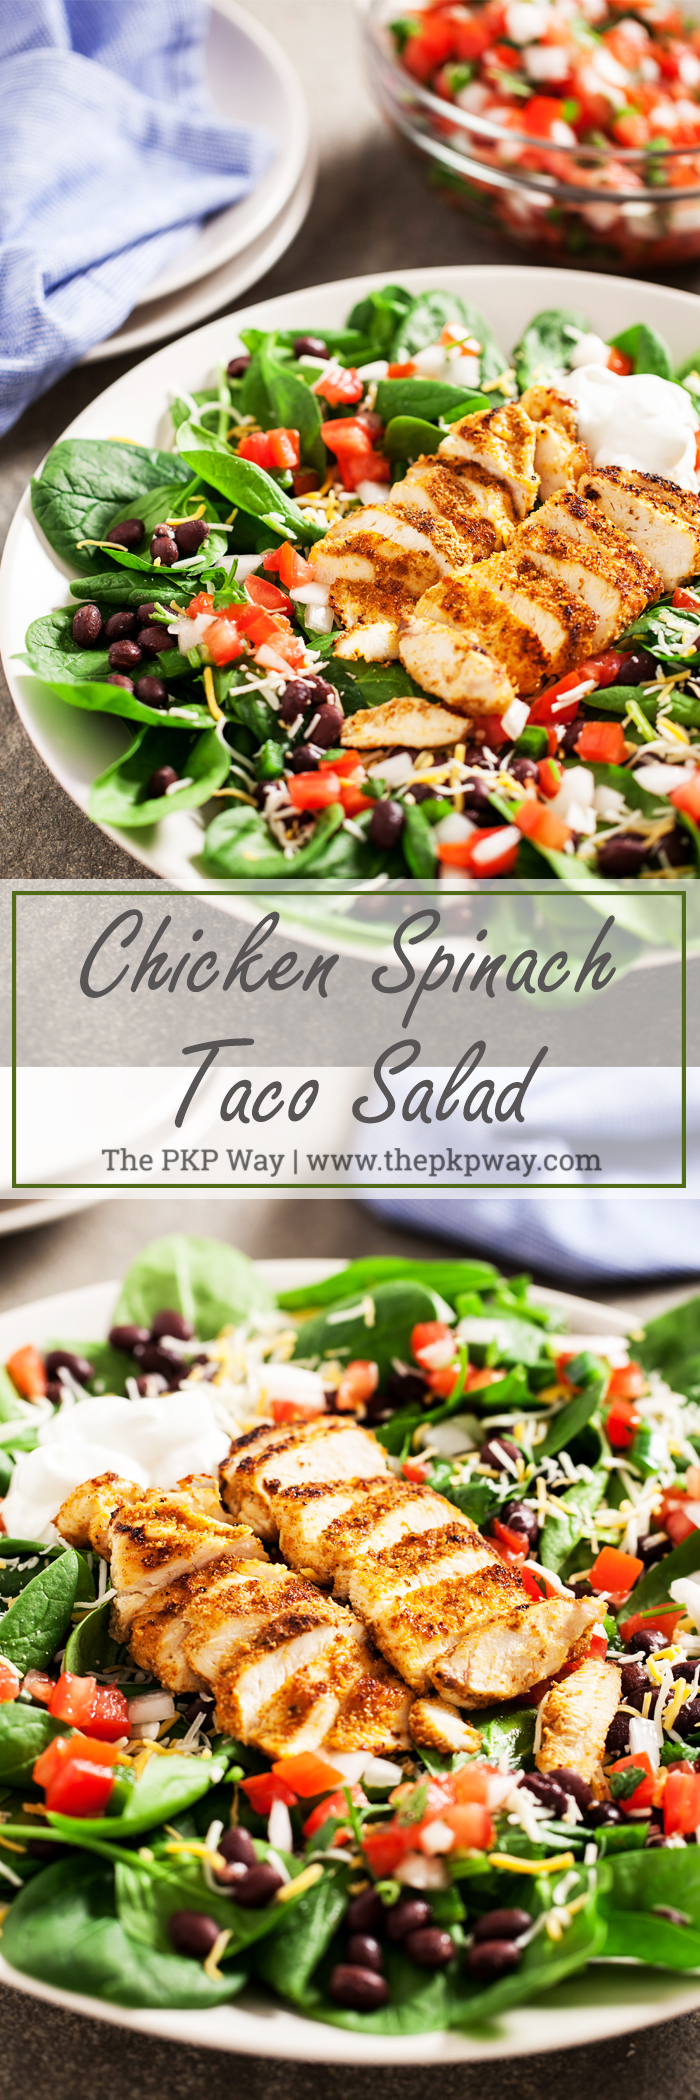 Chicken Spinach Taco Salad - Juicy and perfectly seasoned chicken served on a bed of fresh spinach leaves and topped with black beans and homemade pico de gallo.